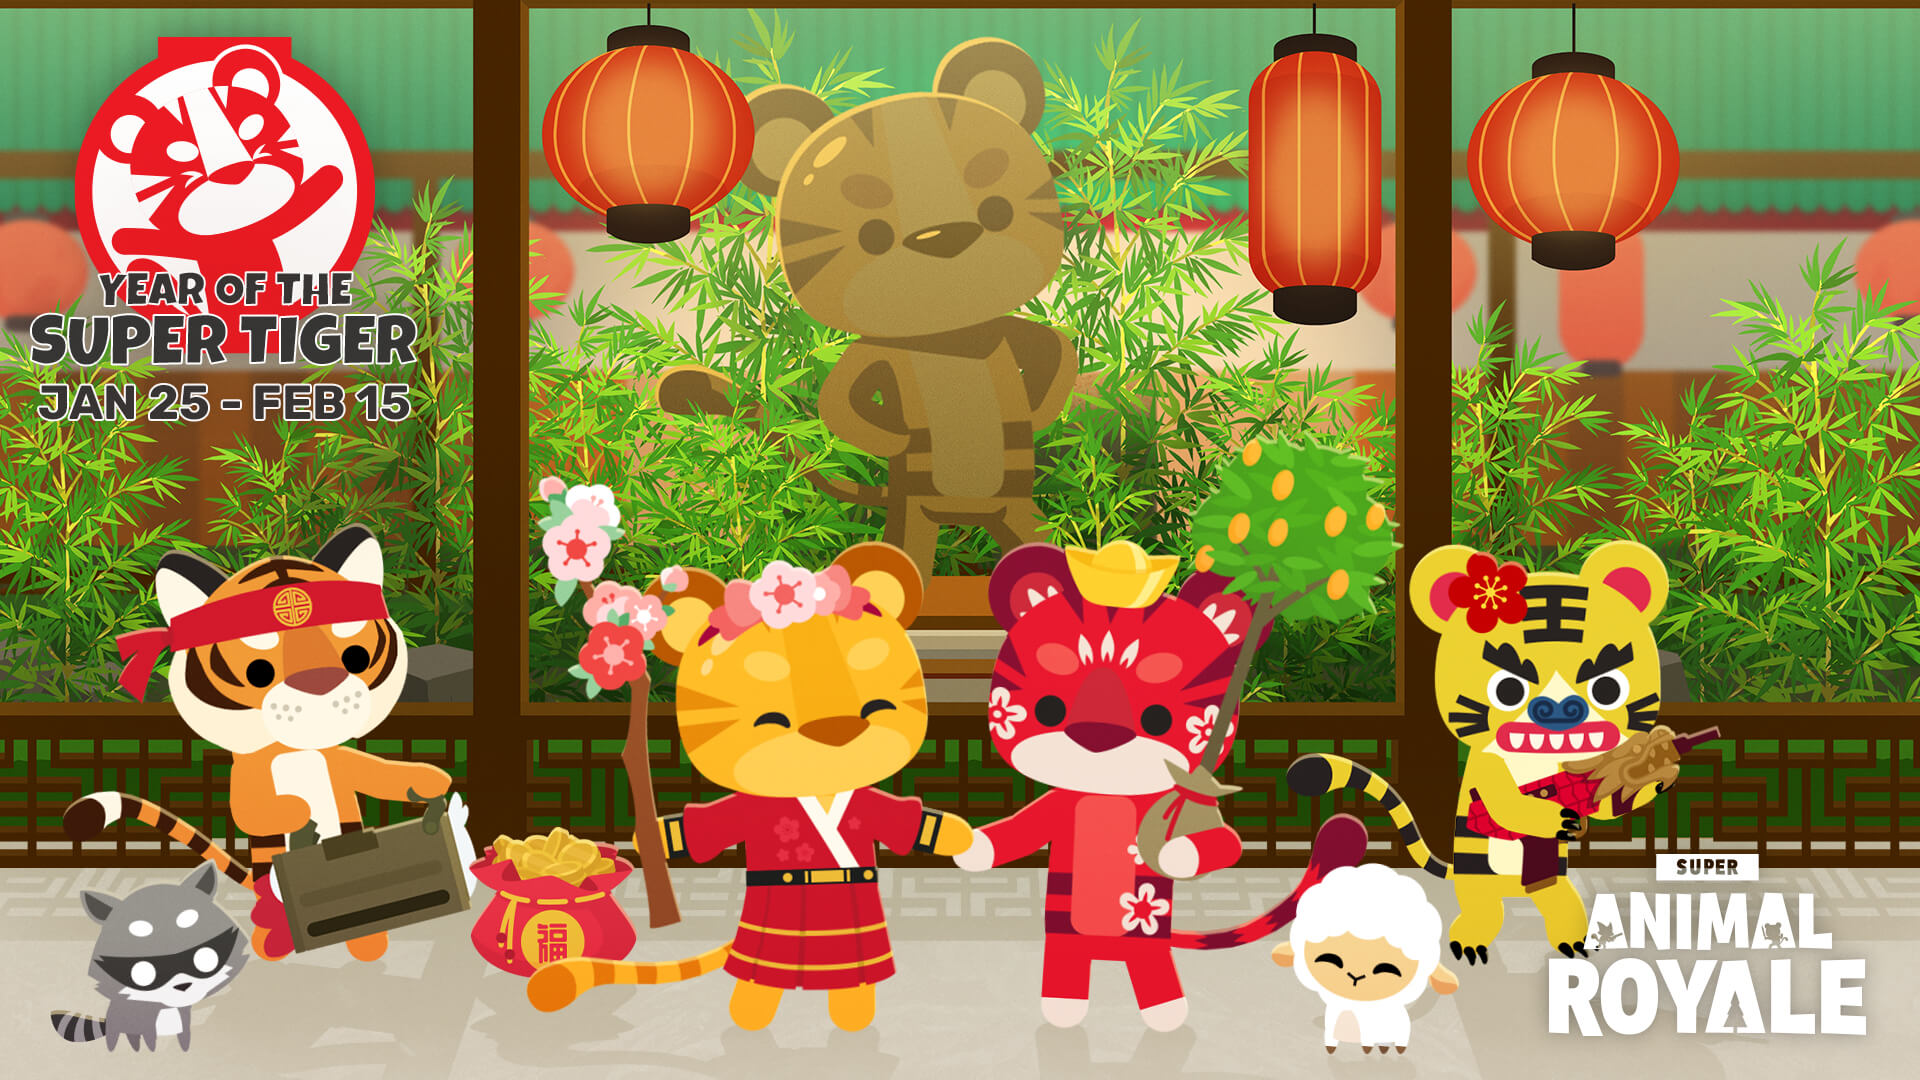 Super Animal Royale.3 New BCG Weapon, Lunar New Year Event, New Mini Pets and more